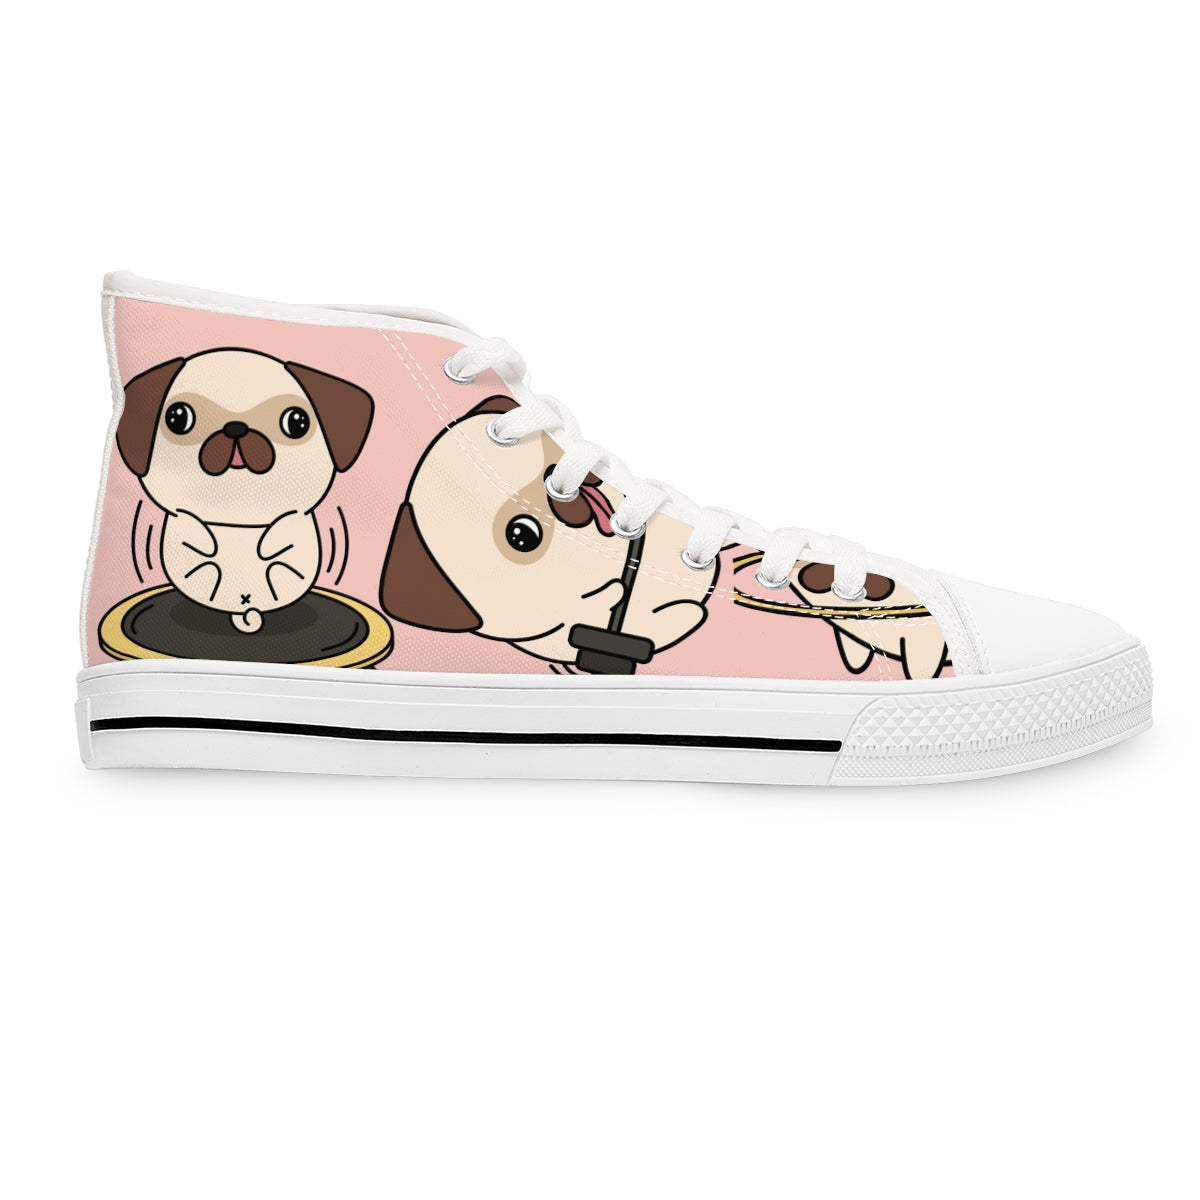 DOG PUPPIES WOMEN'S HIGH TOP SNEAKERS PINK WHITE | ARTZIRA, DOG LOVERS SNEAKERS